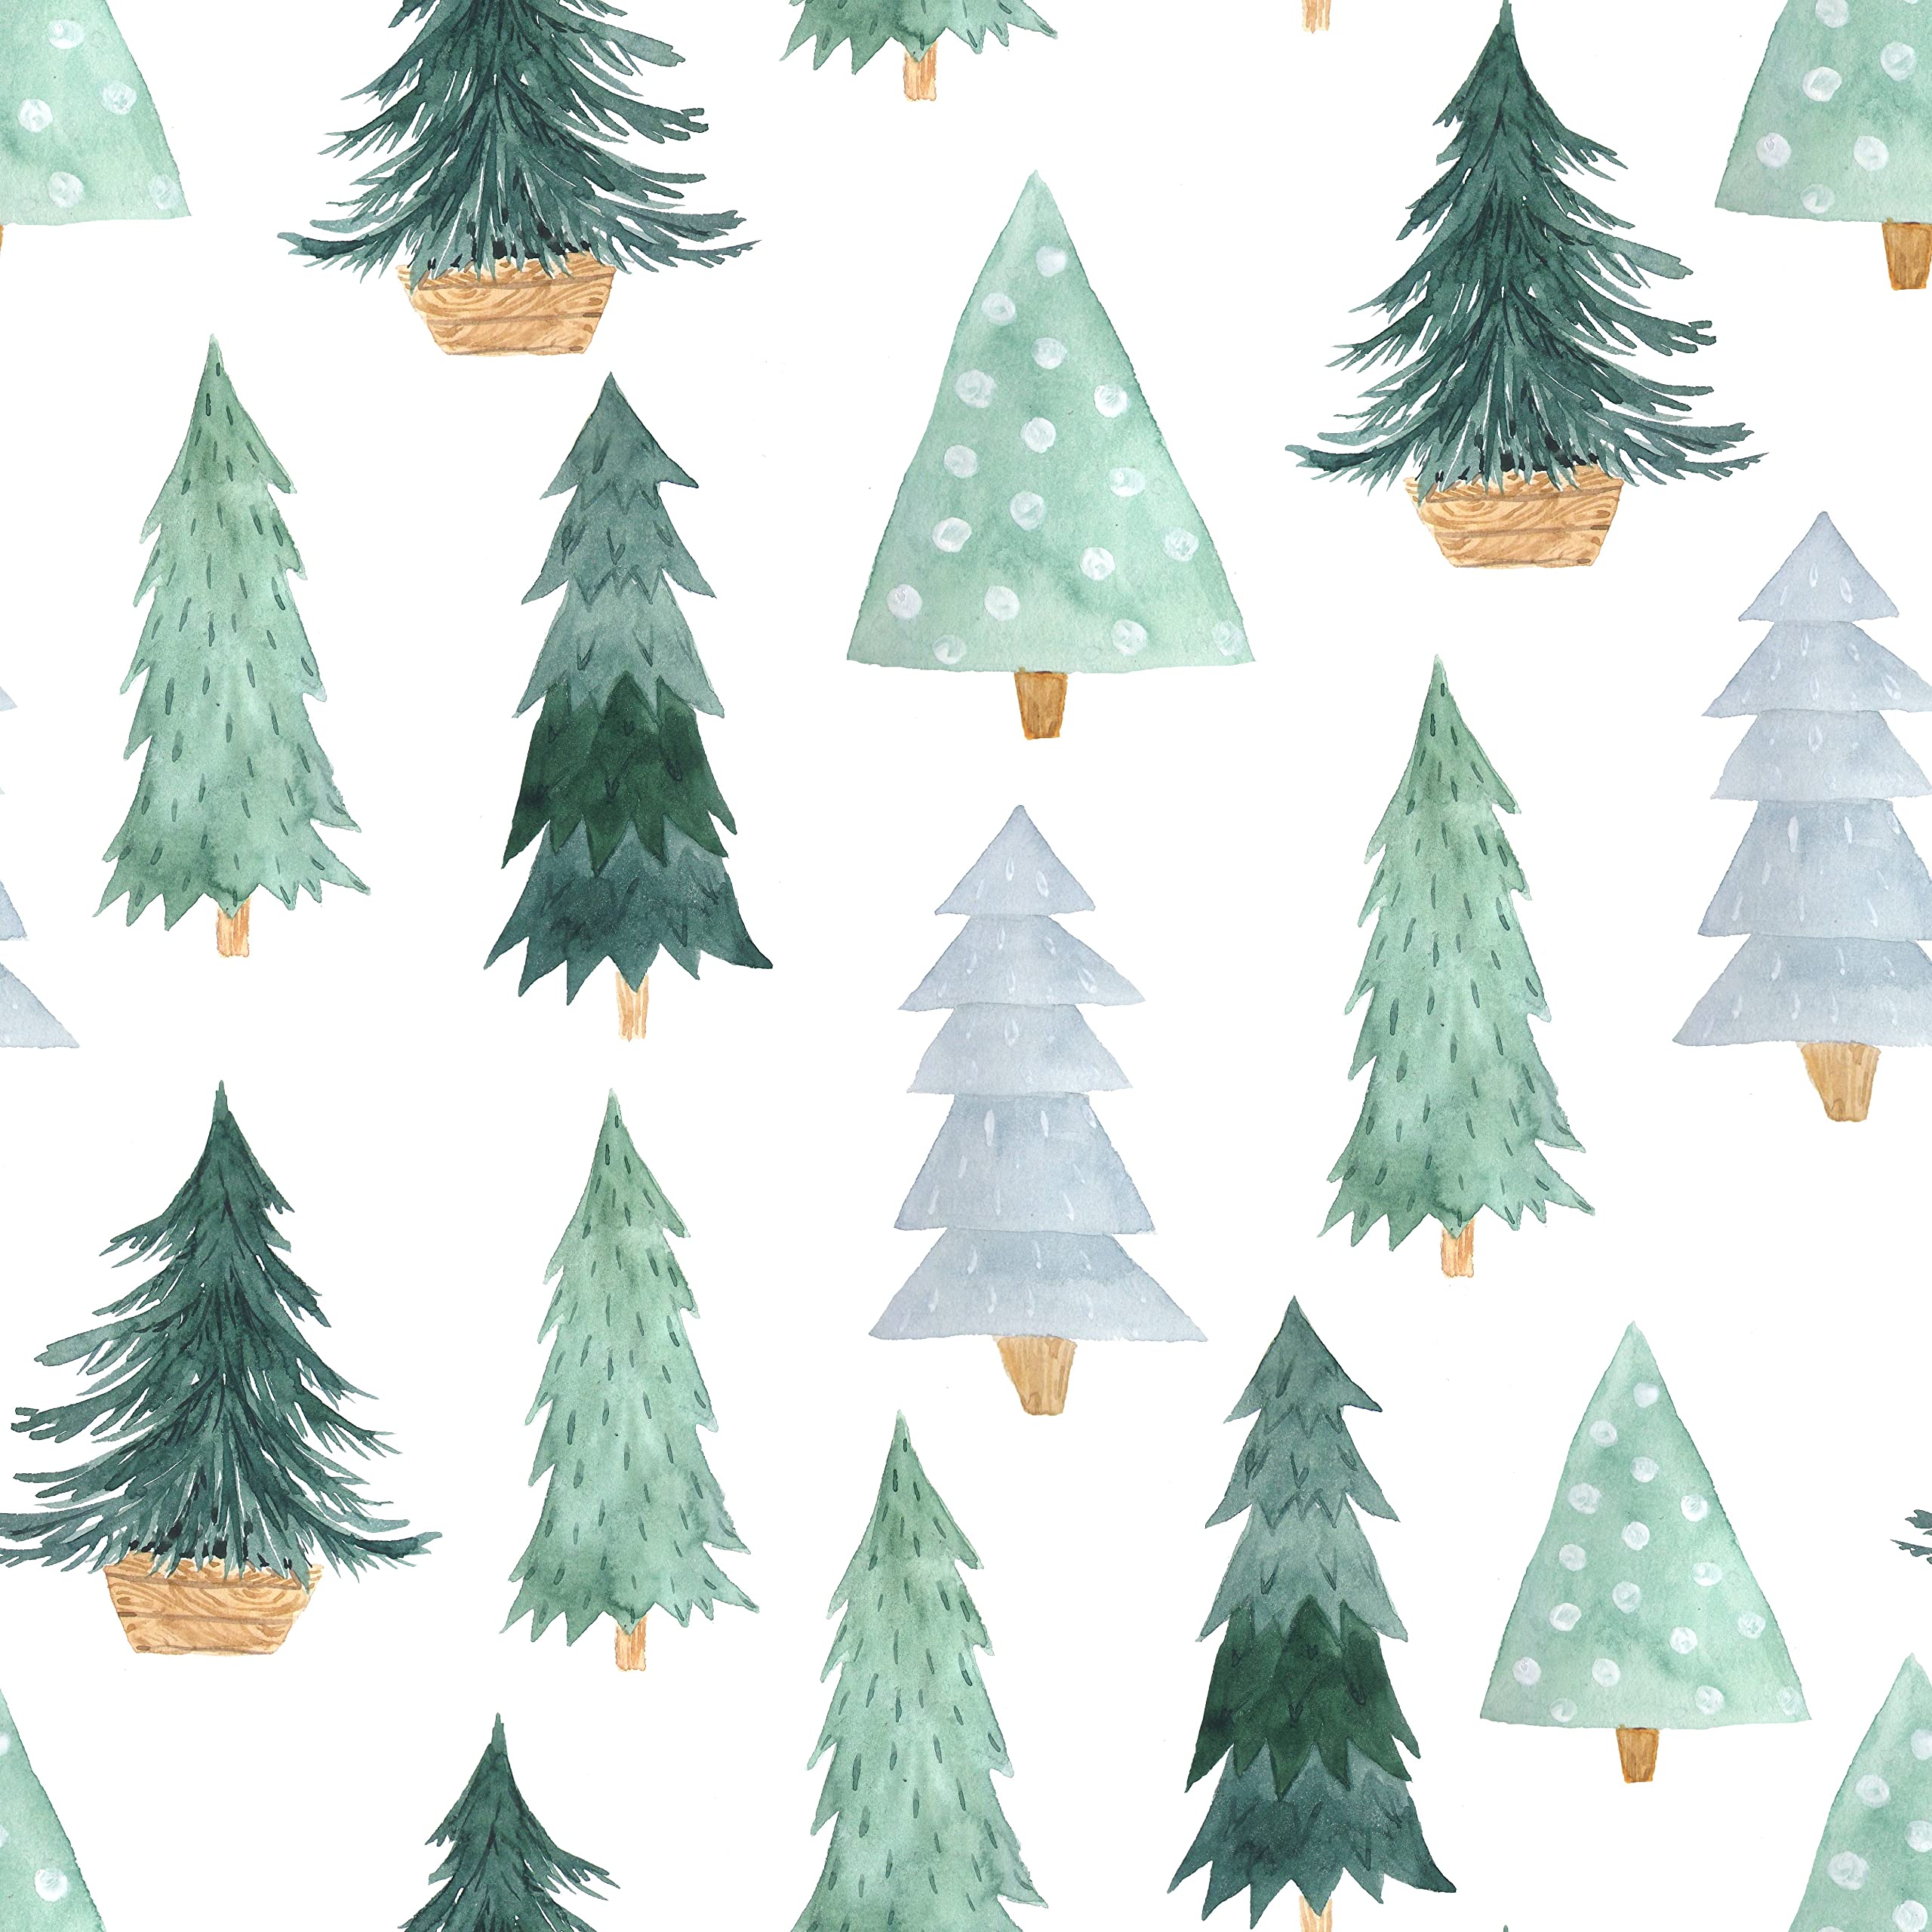 Christmas Tree Decor Peel and Stick Wallpaper Green Cartoon Pines Contact Paper Removable Waterproof Wallpaper Vinyl Self Adhesive Wallpaper for Kids Bedroom Living room Decorative 17.71in x 118.1in